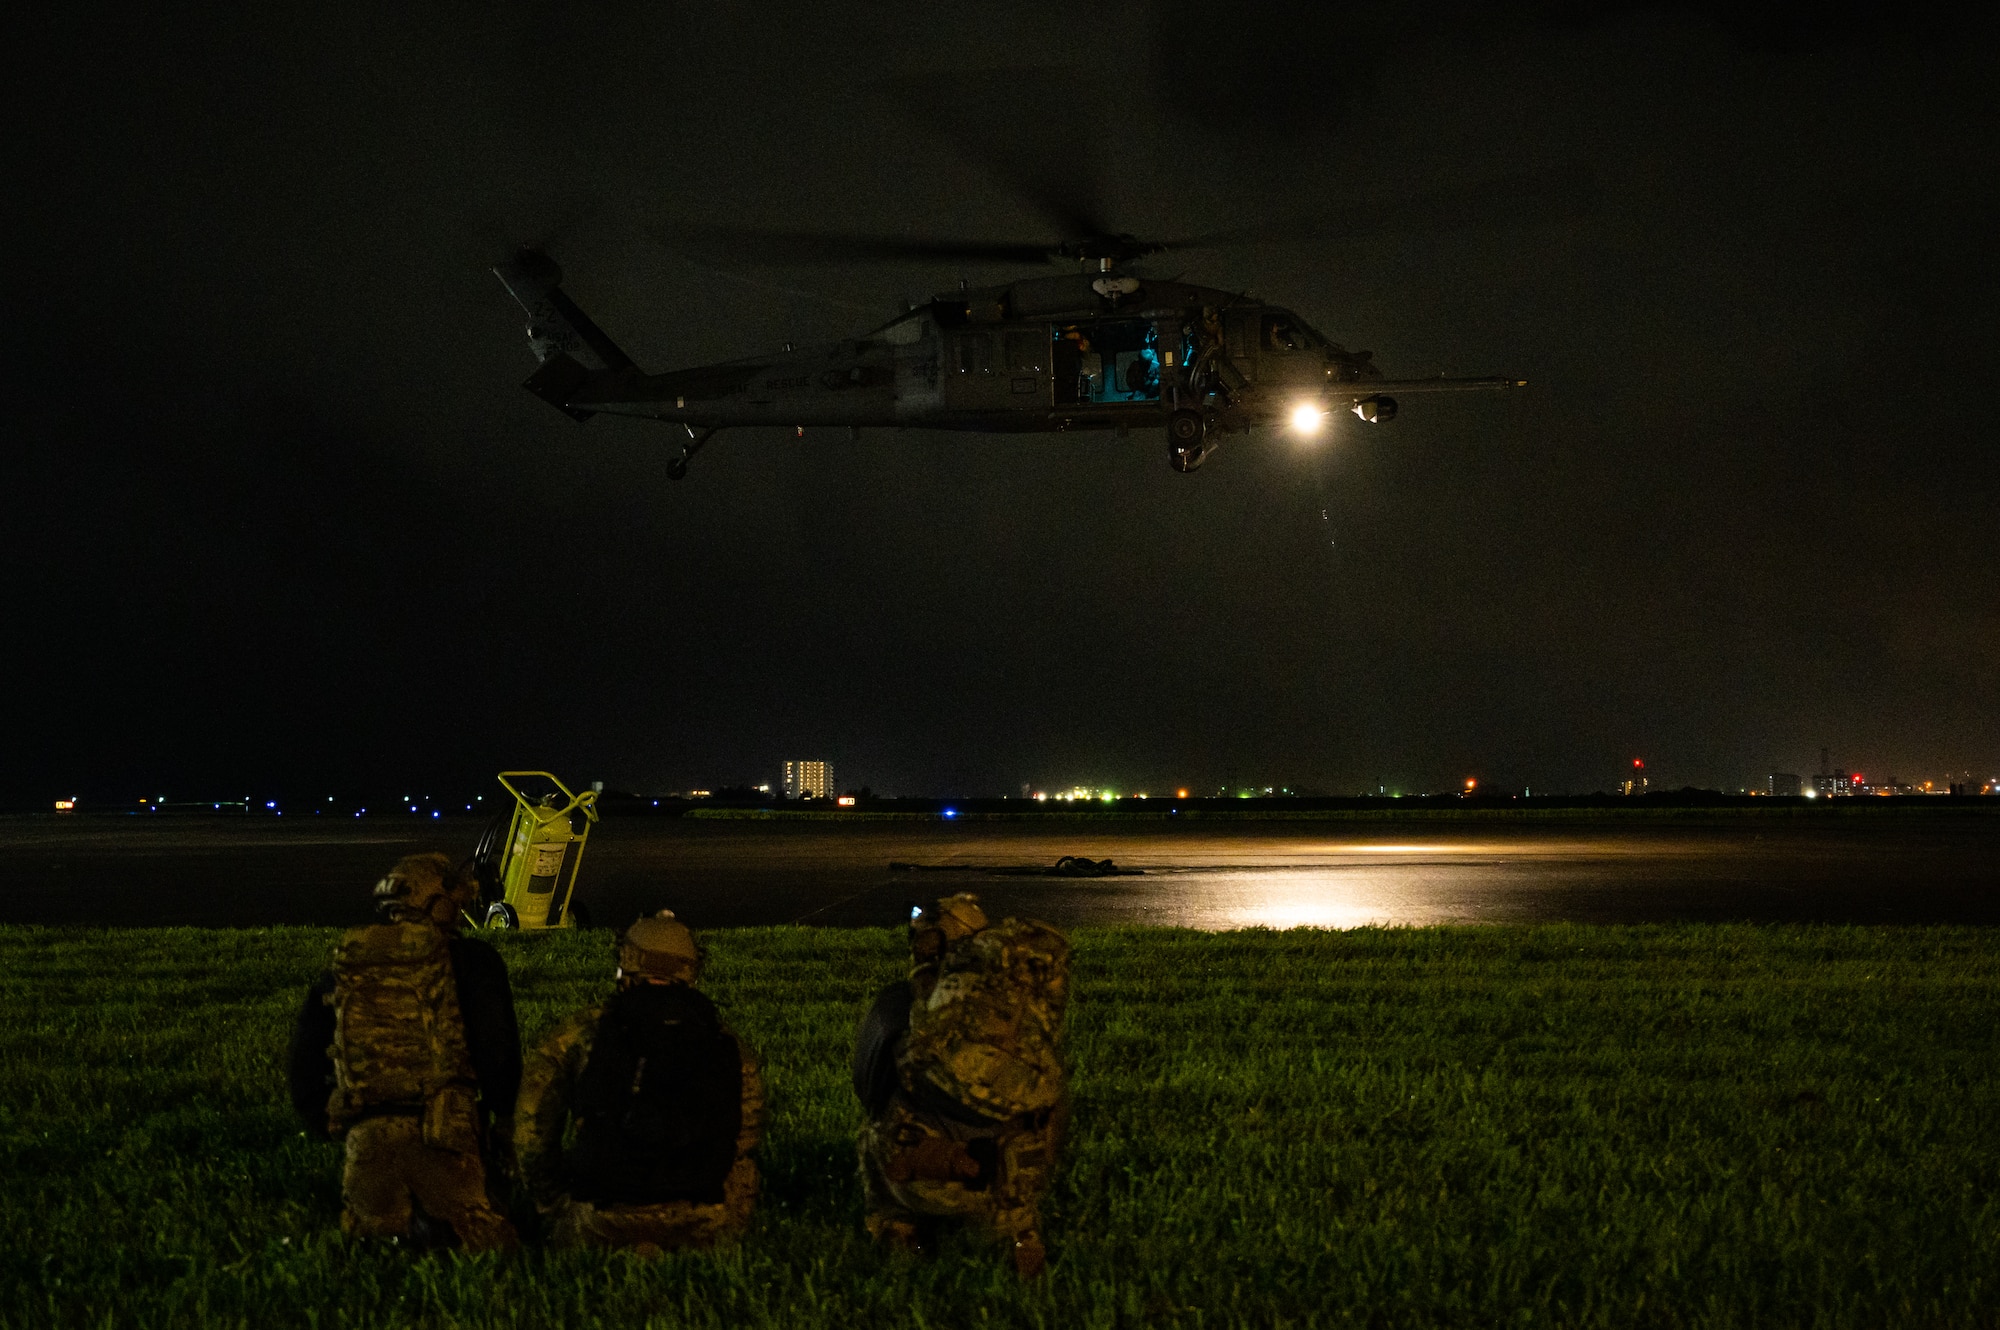 Airmen watch helicopter land.